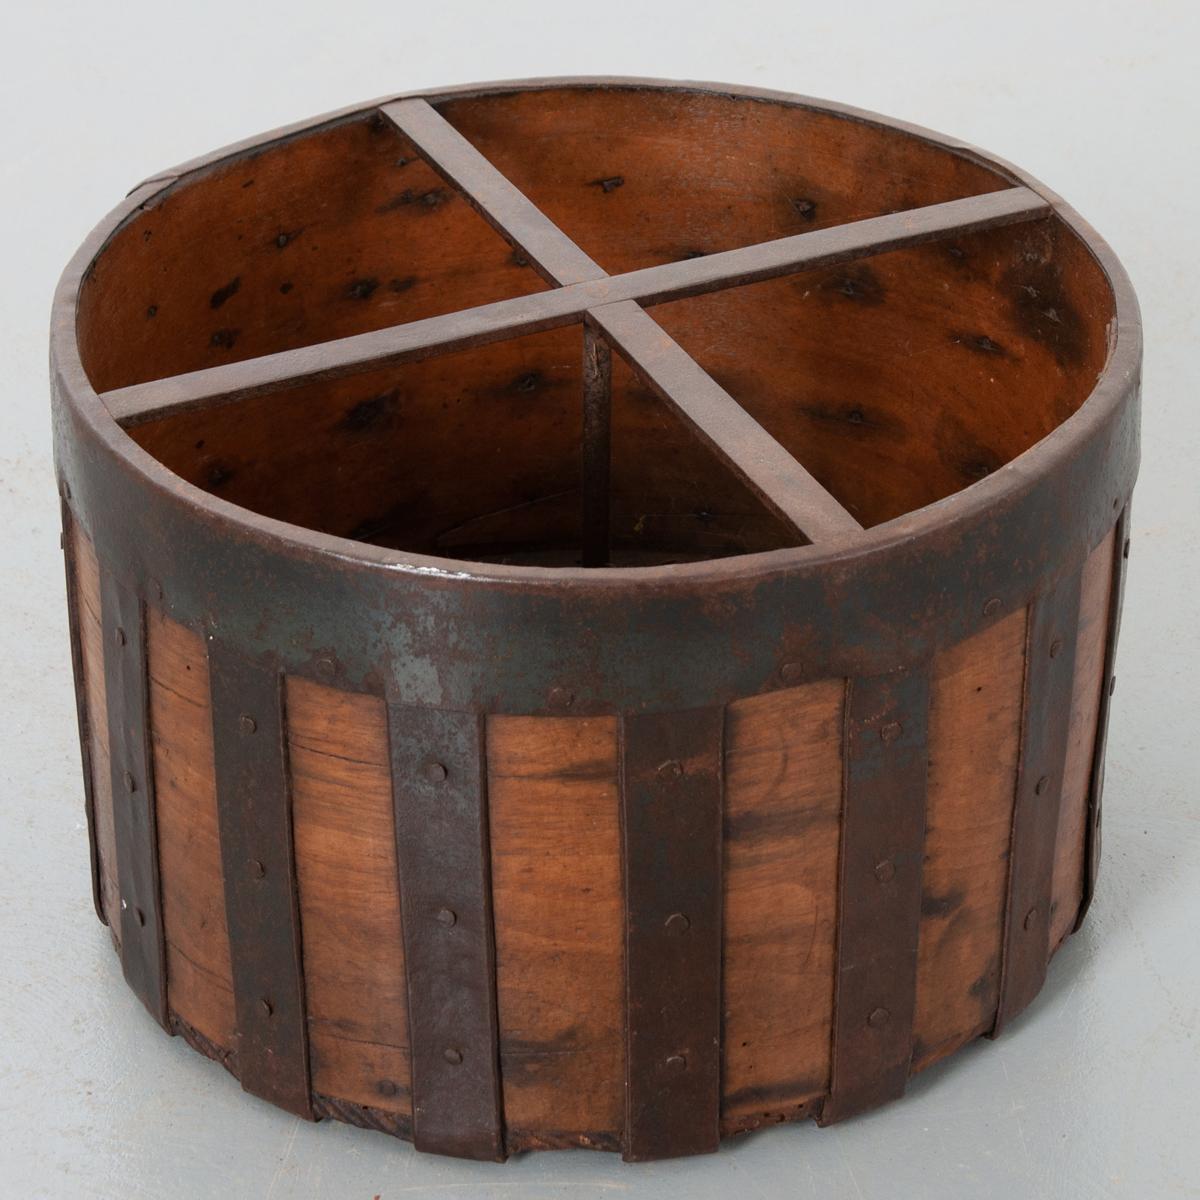 This dry grain measure is a handsome culinary antique. Beautifully aged wood with patinated hand forged iron banding provides this piece with deep character. It has an abundance of iron work and is quite unique.
   